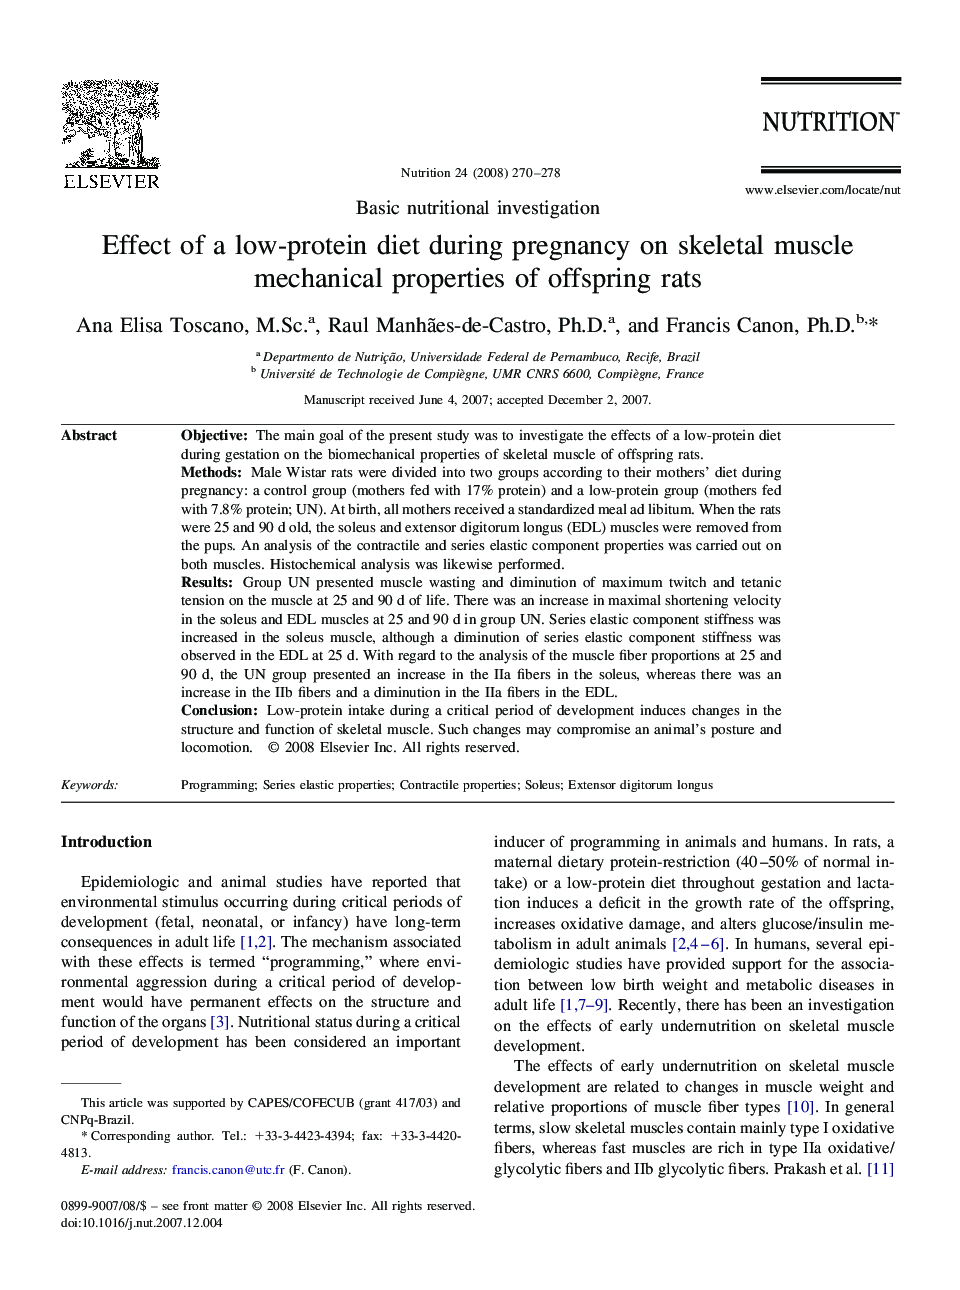 Effect of a low-protein diet during pregnancy on skeletal muscle mechanical properties of offspring rats 